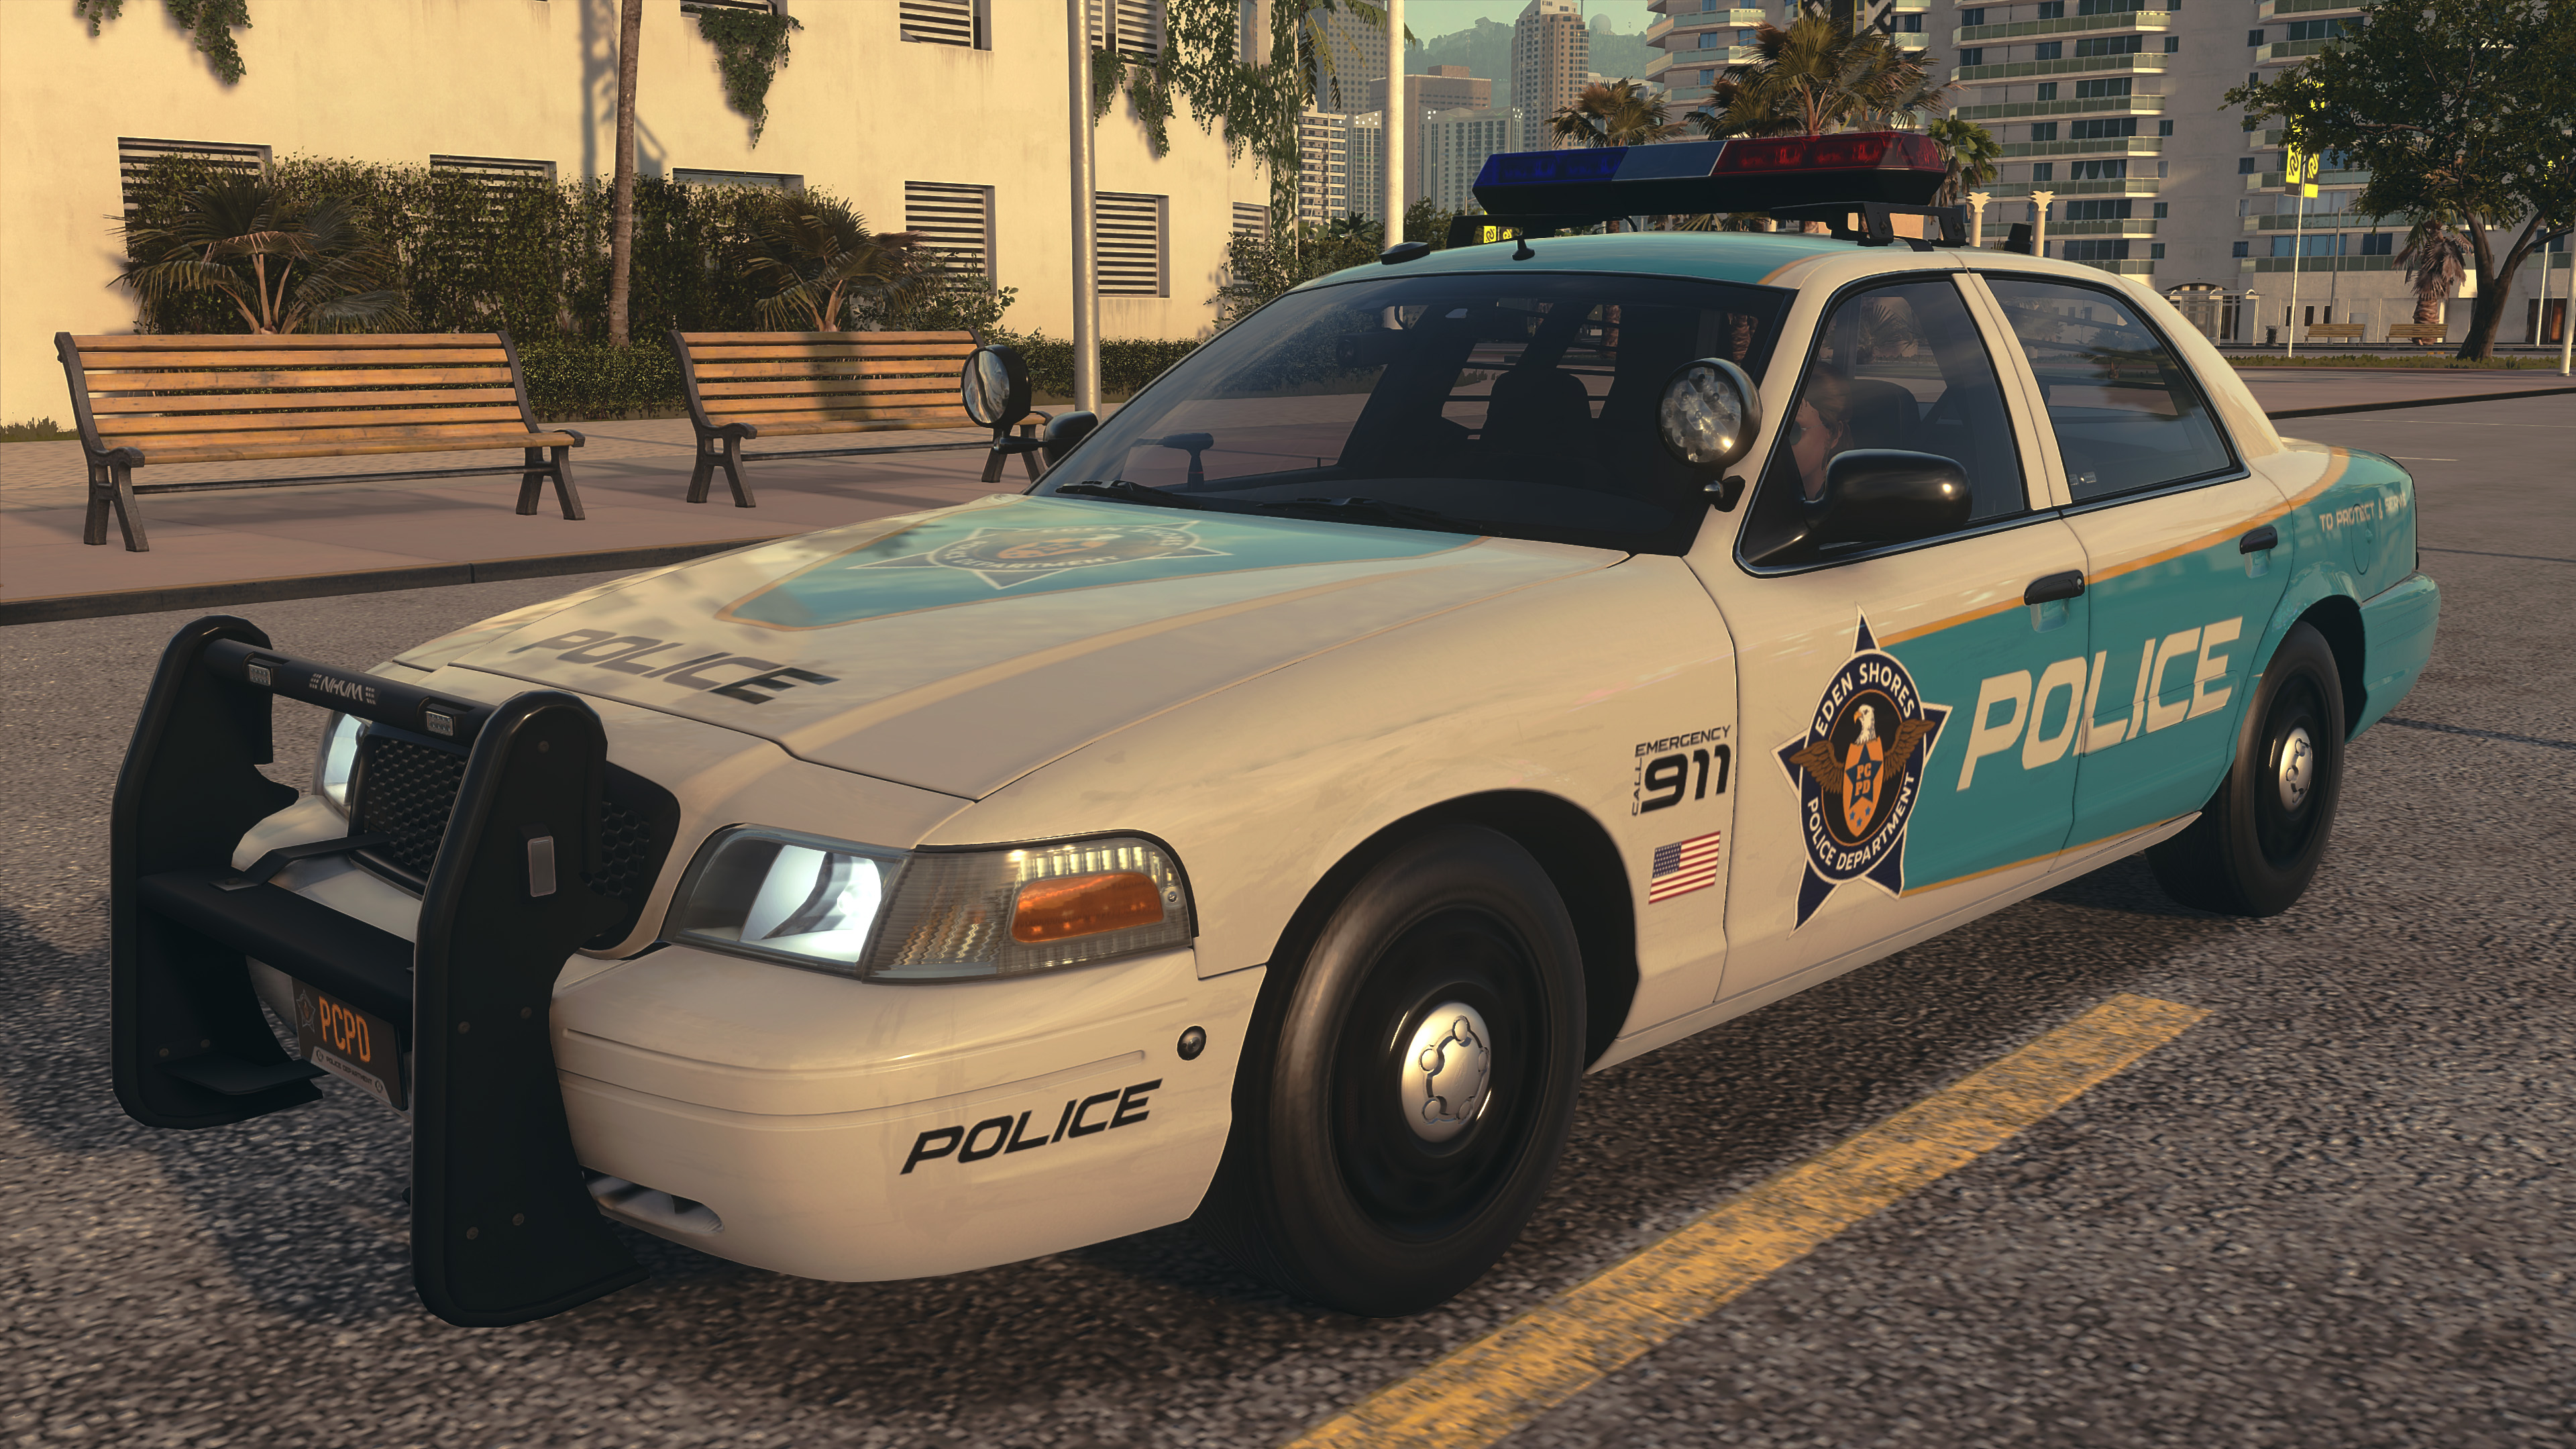 Policeman speed. Sheriff Department Ford Crown Victoria.